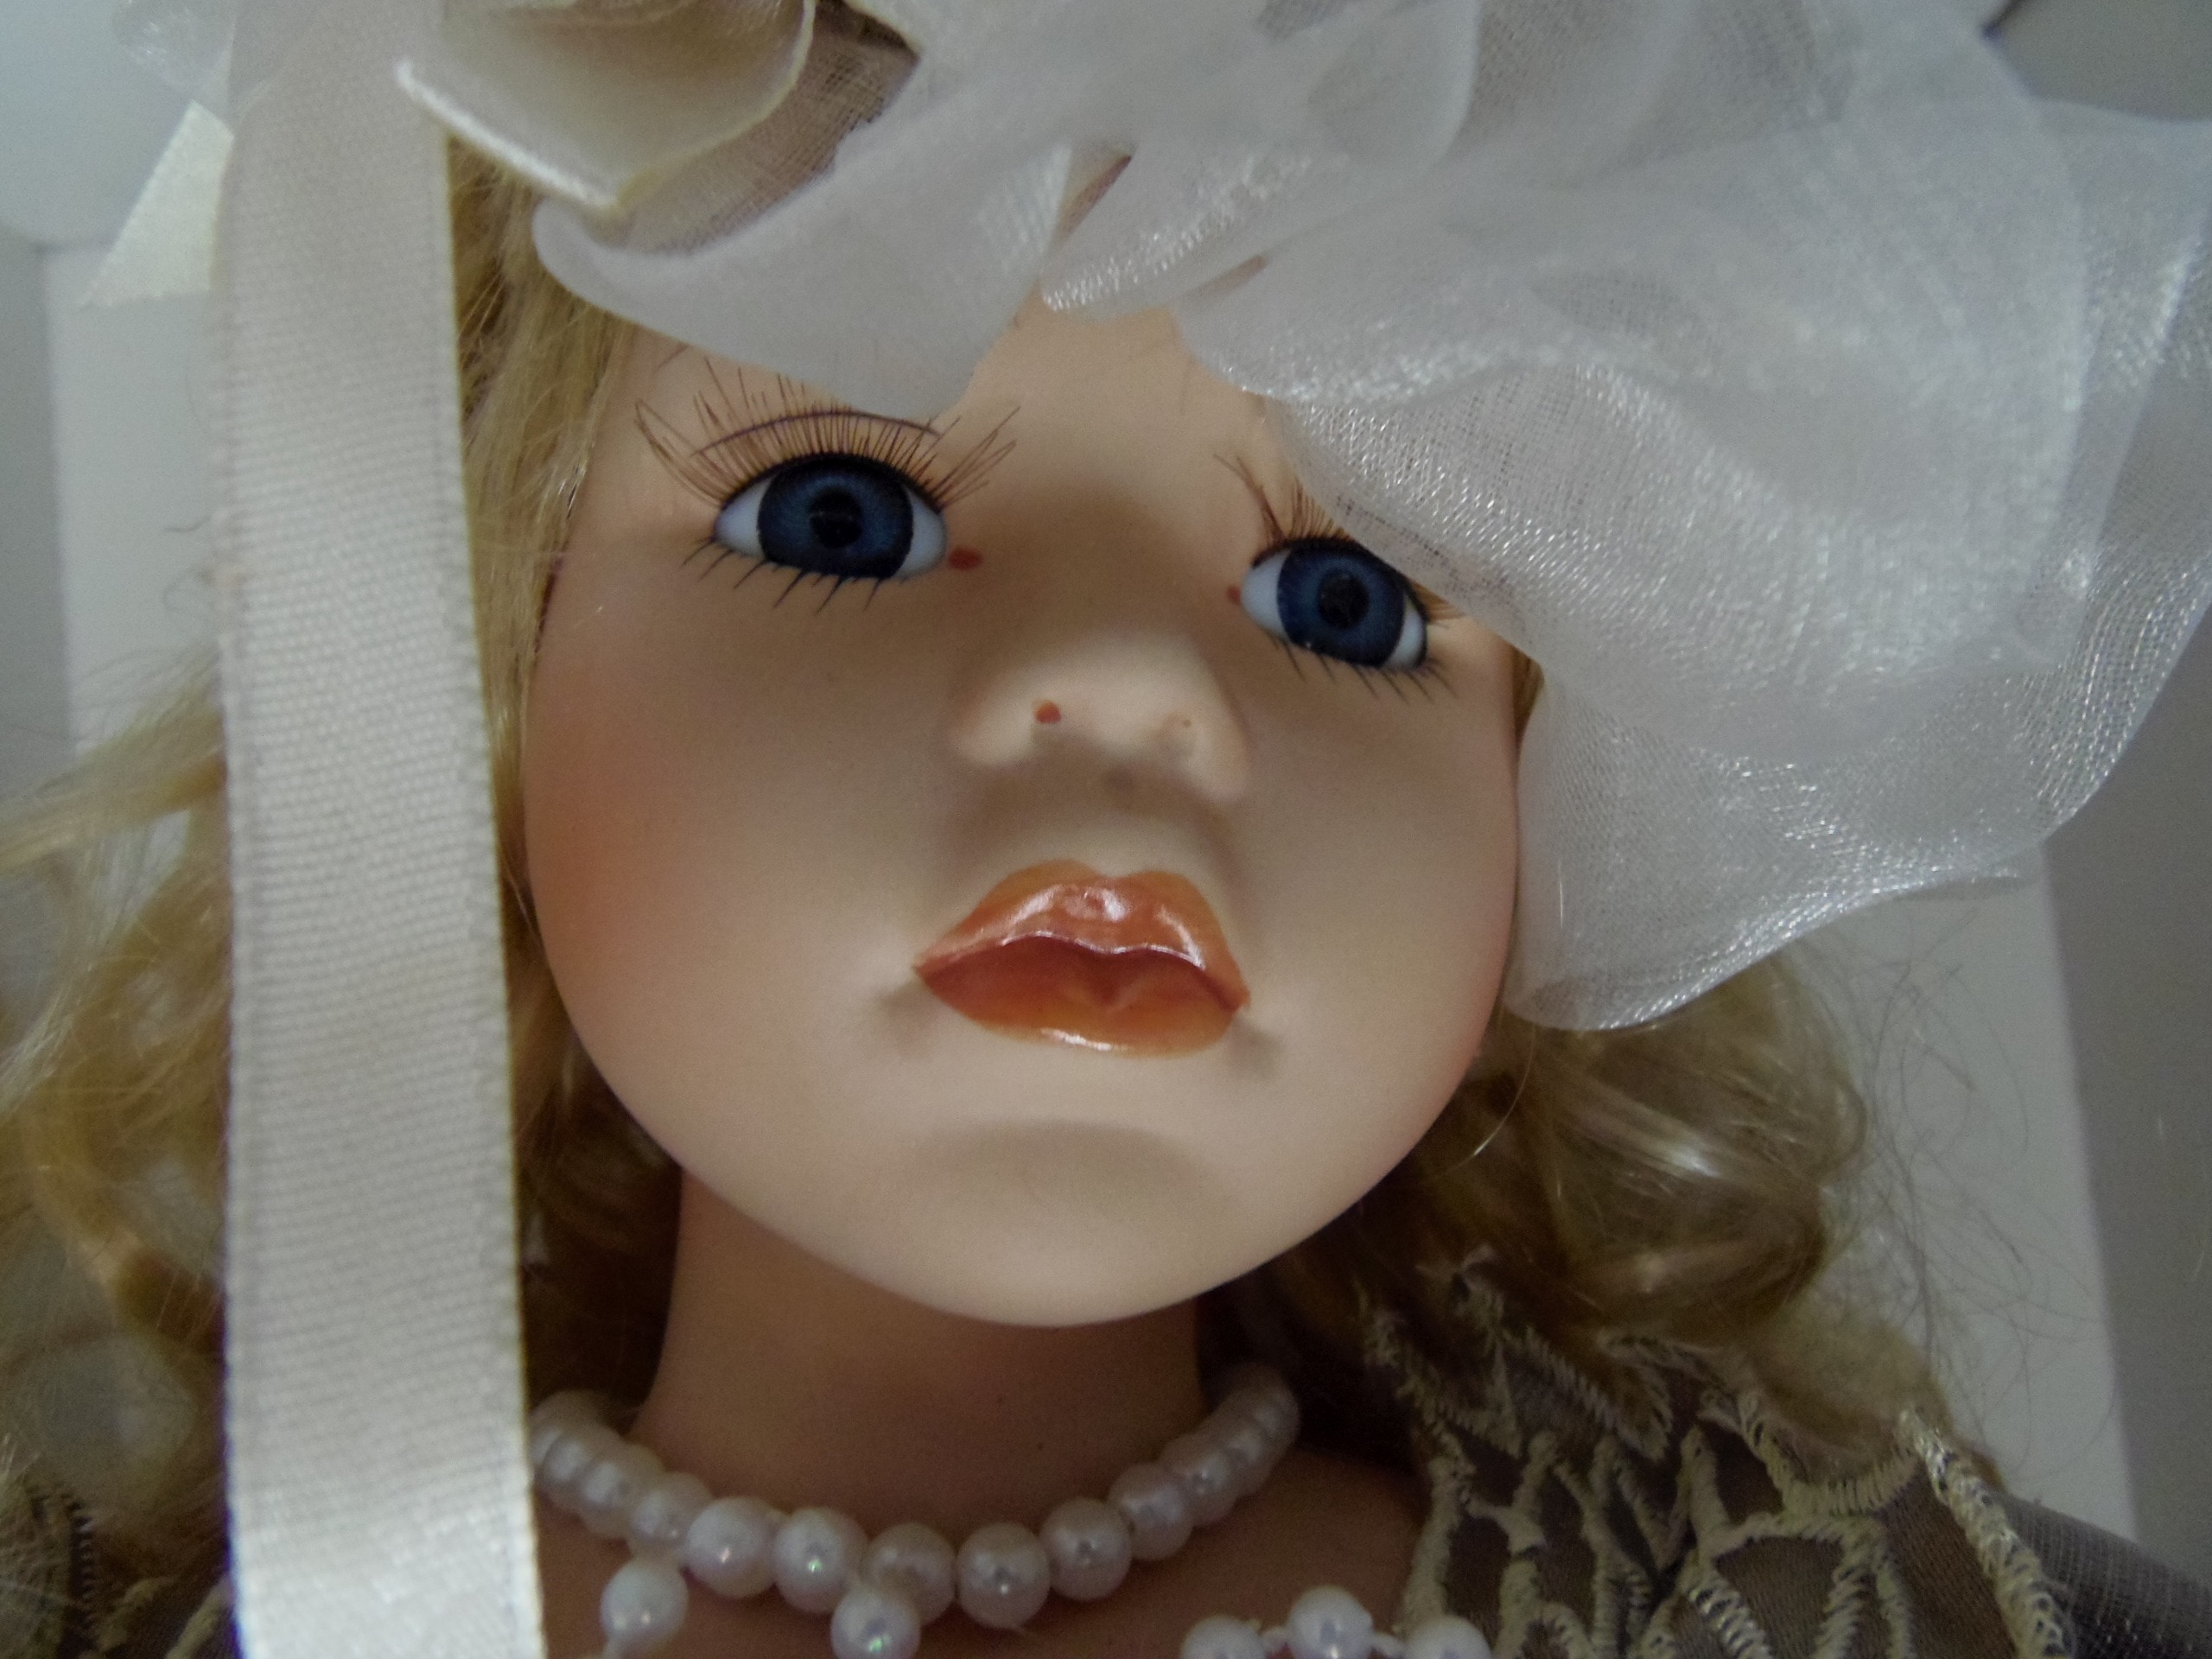 female doll wearing white beaded necklace and white hat